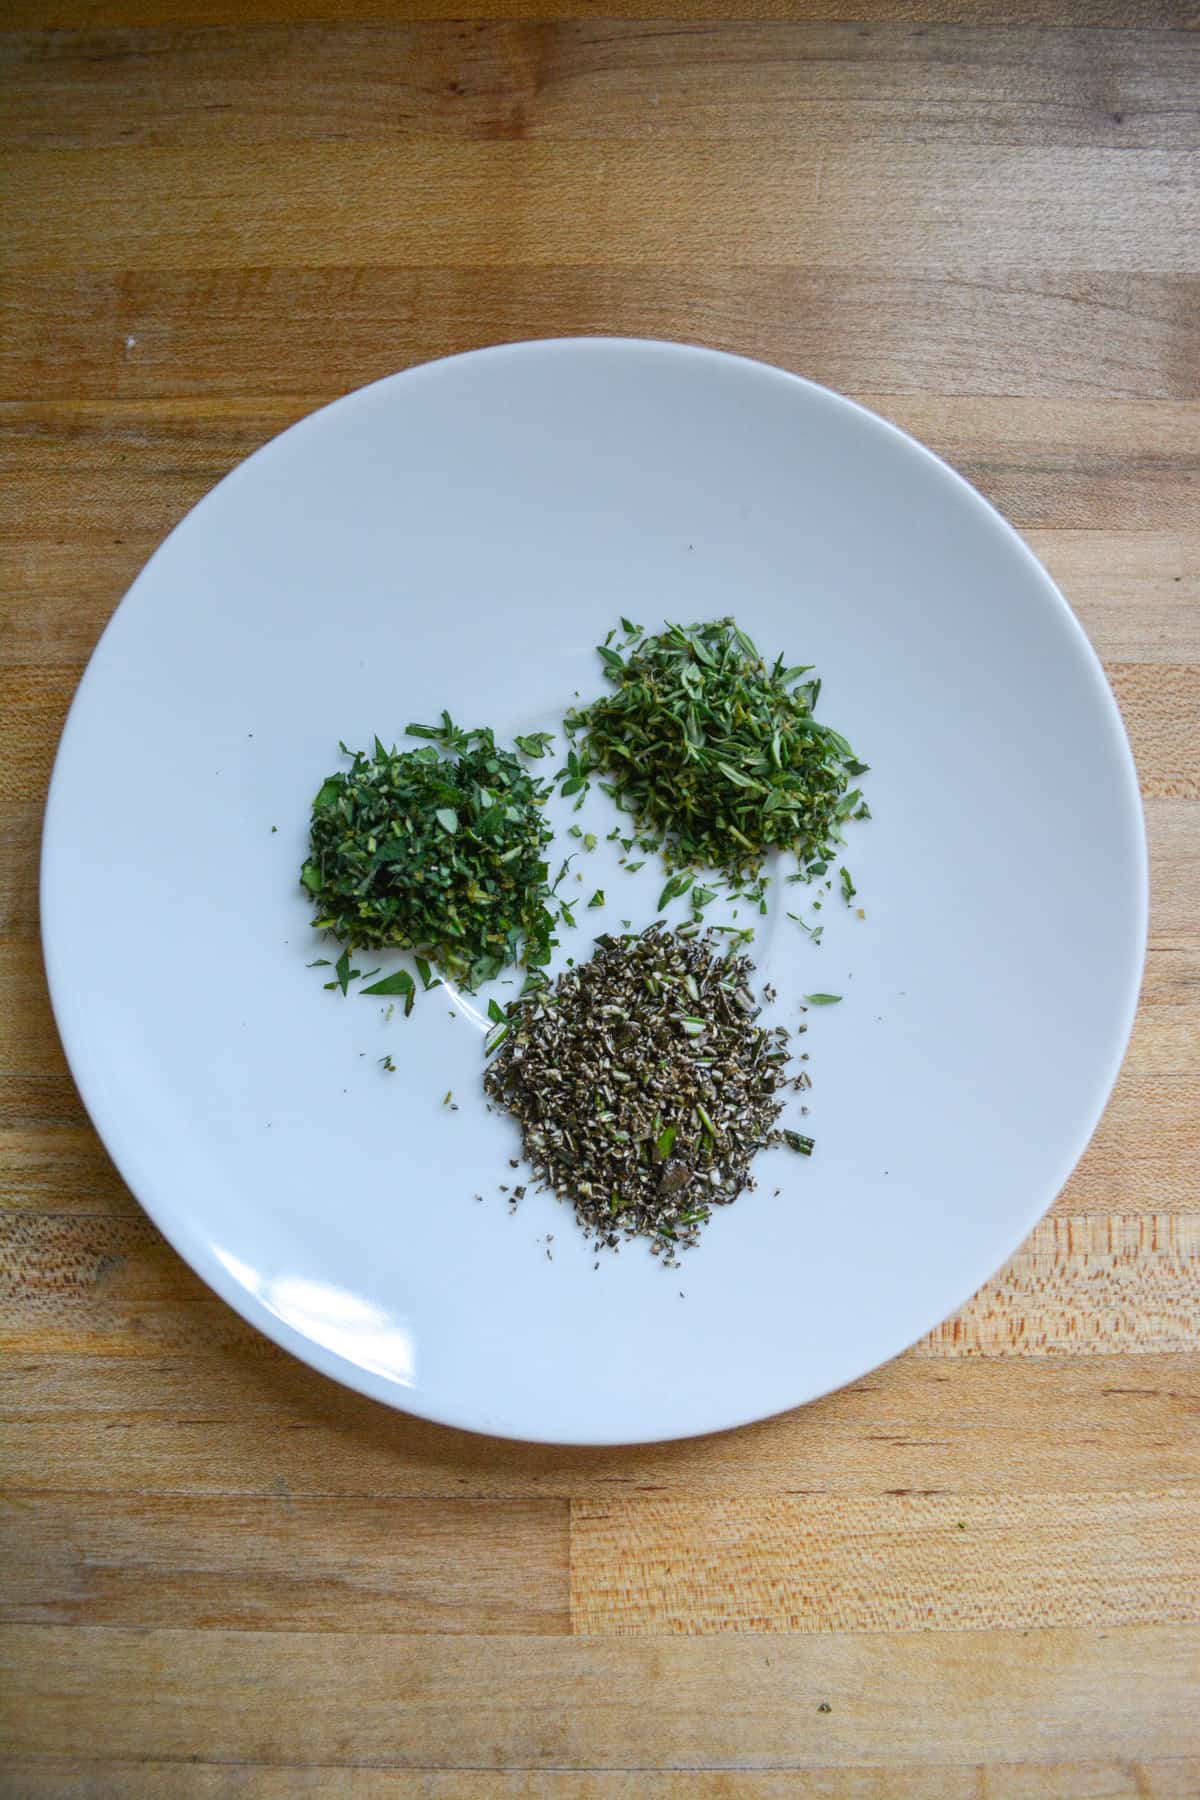 Finely chopped herbs on a plate